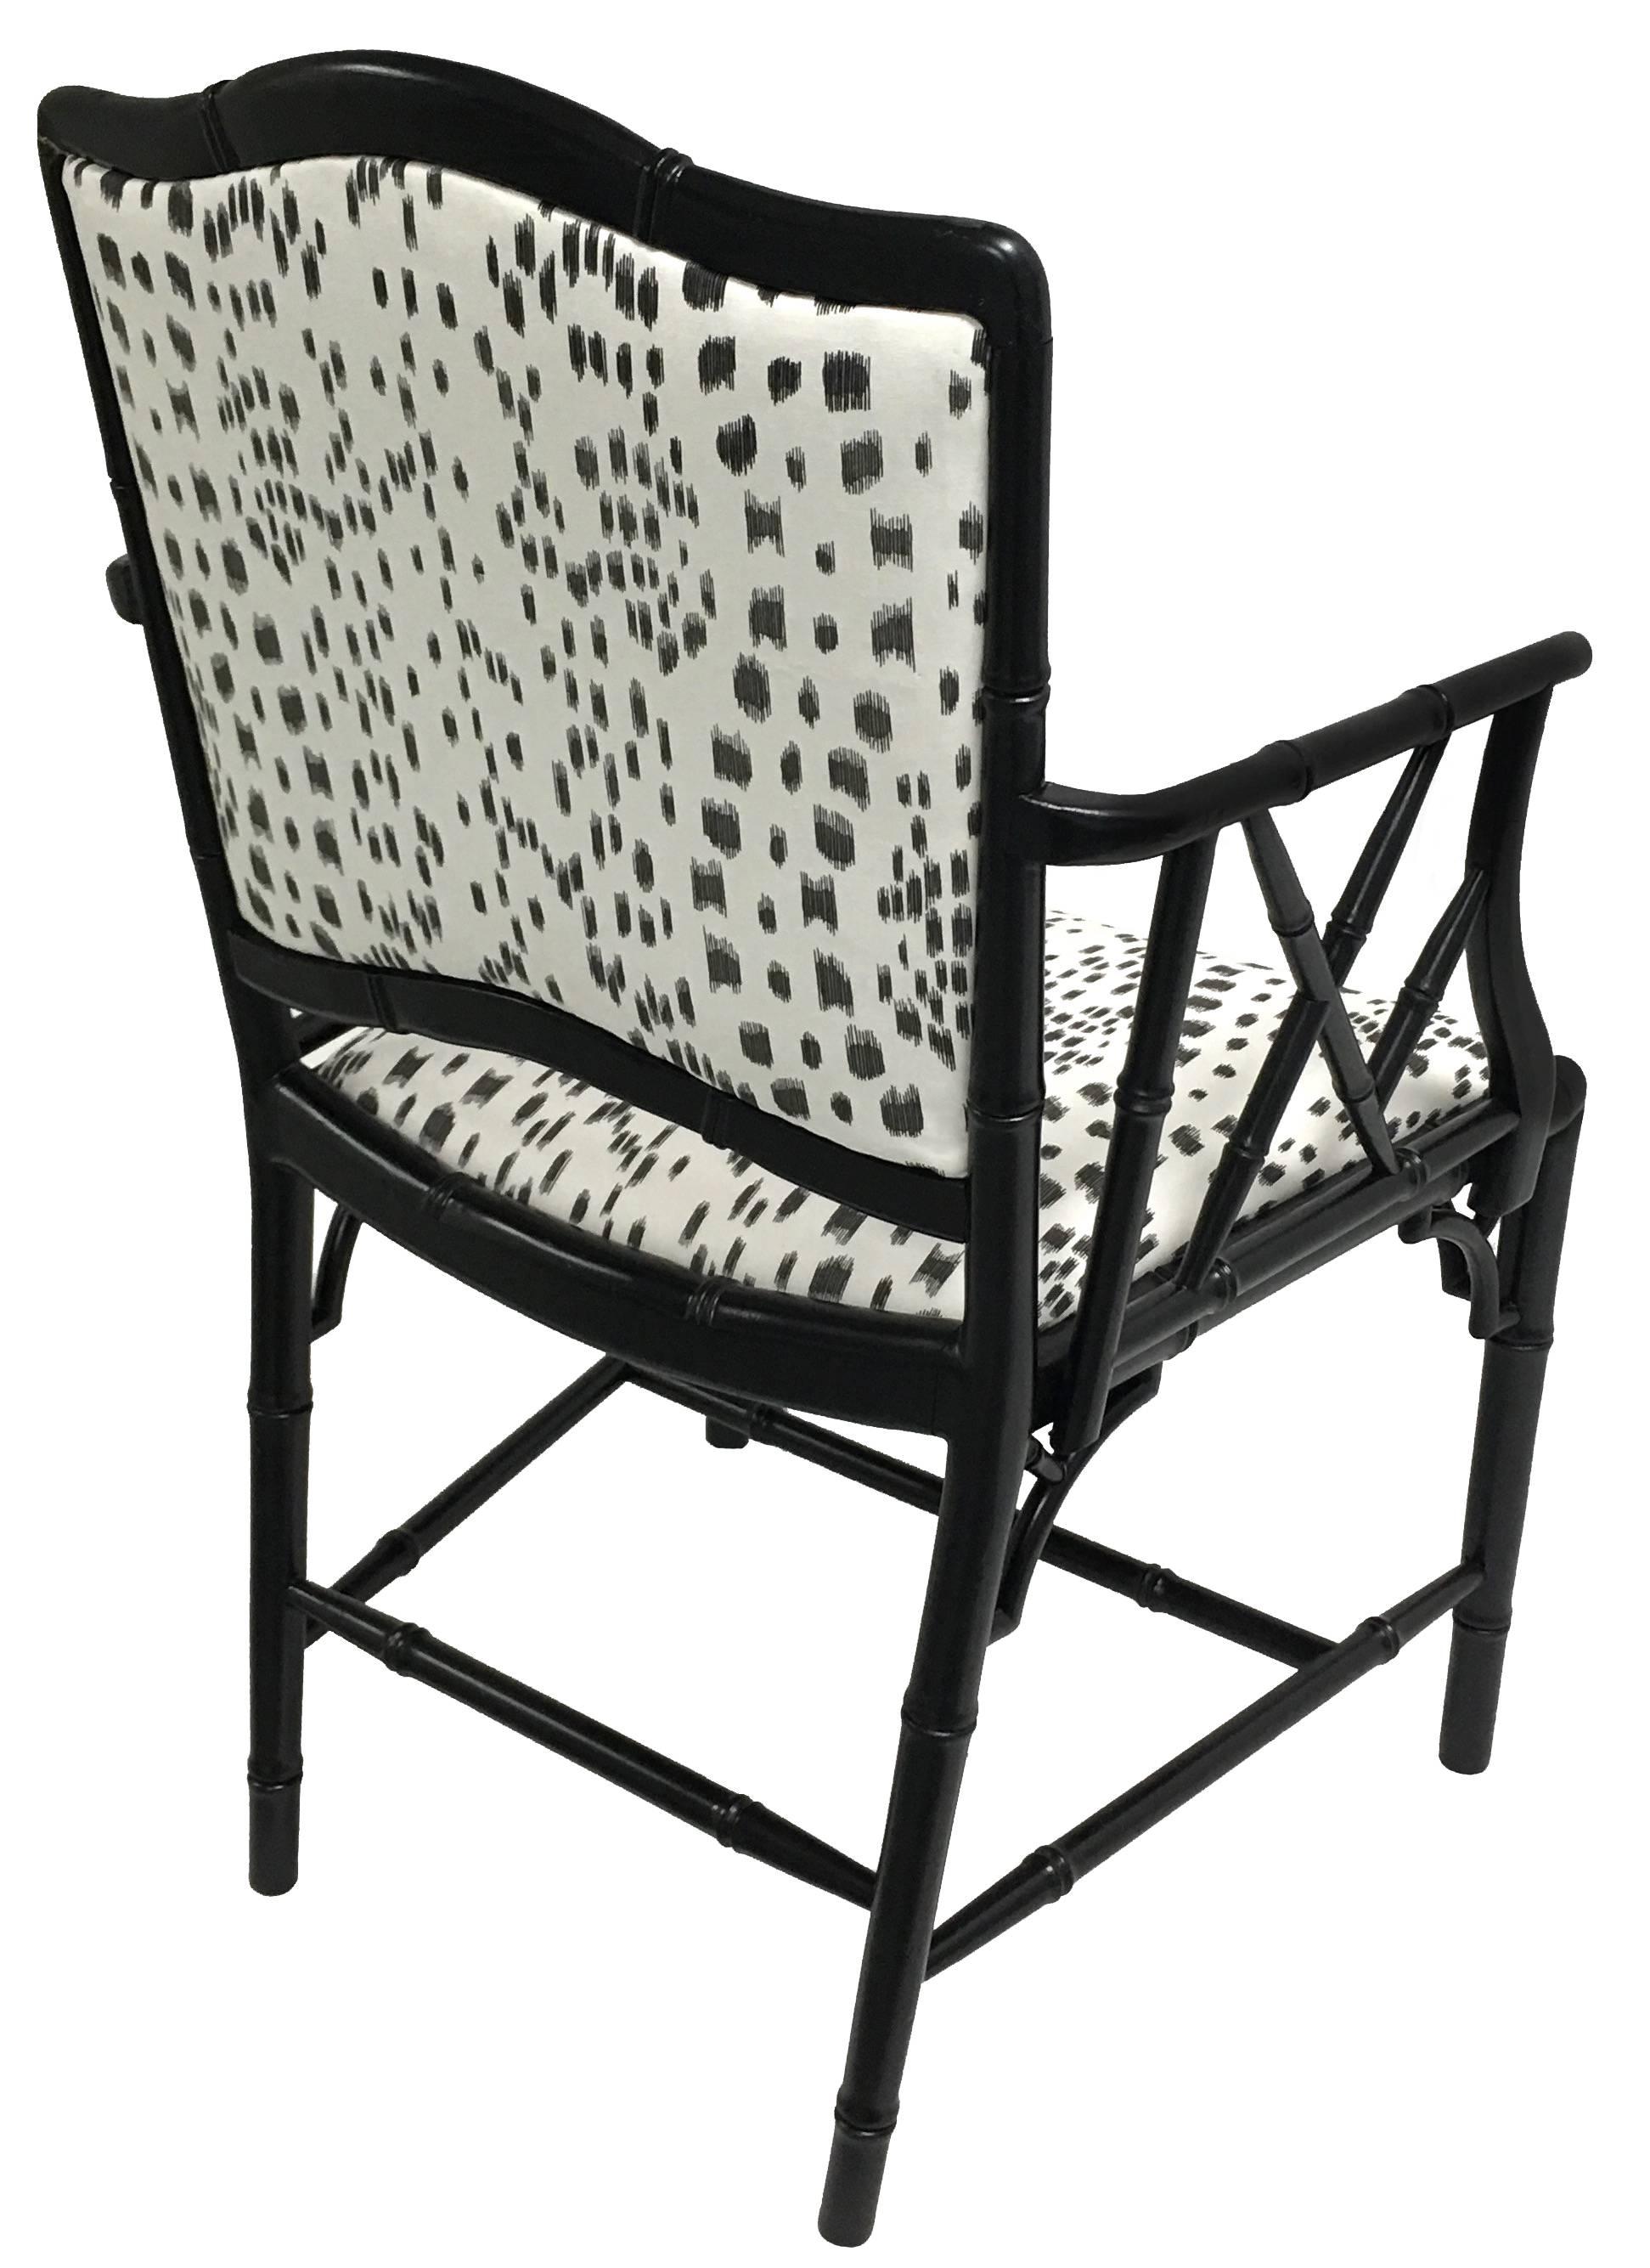 1960s black faux bamboo armchair. Newly refinished in black satin painted finish. Newly upholstered in Les Touches by Brunschwig Fils in black/white. Arm is 28.25